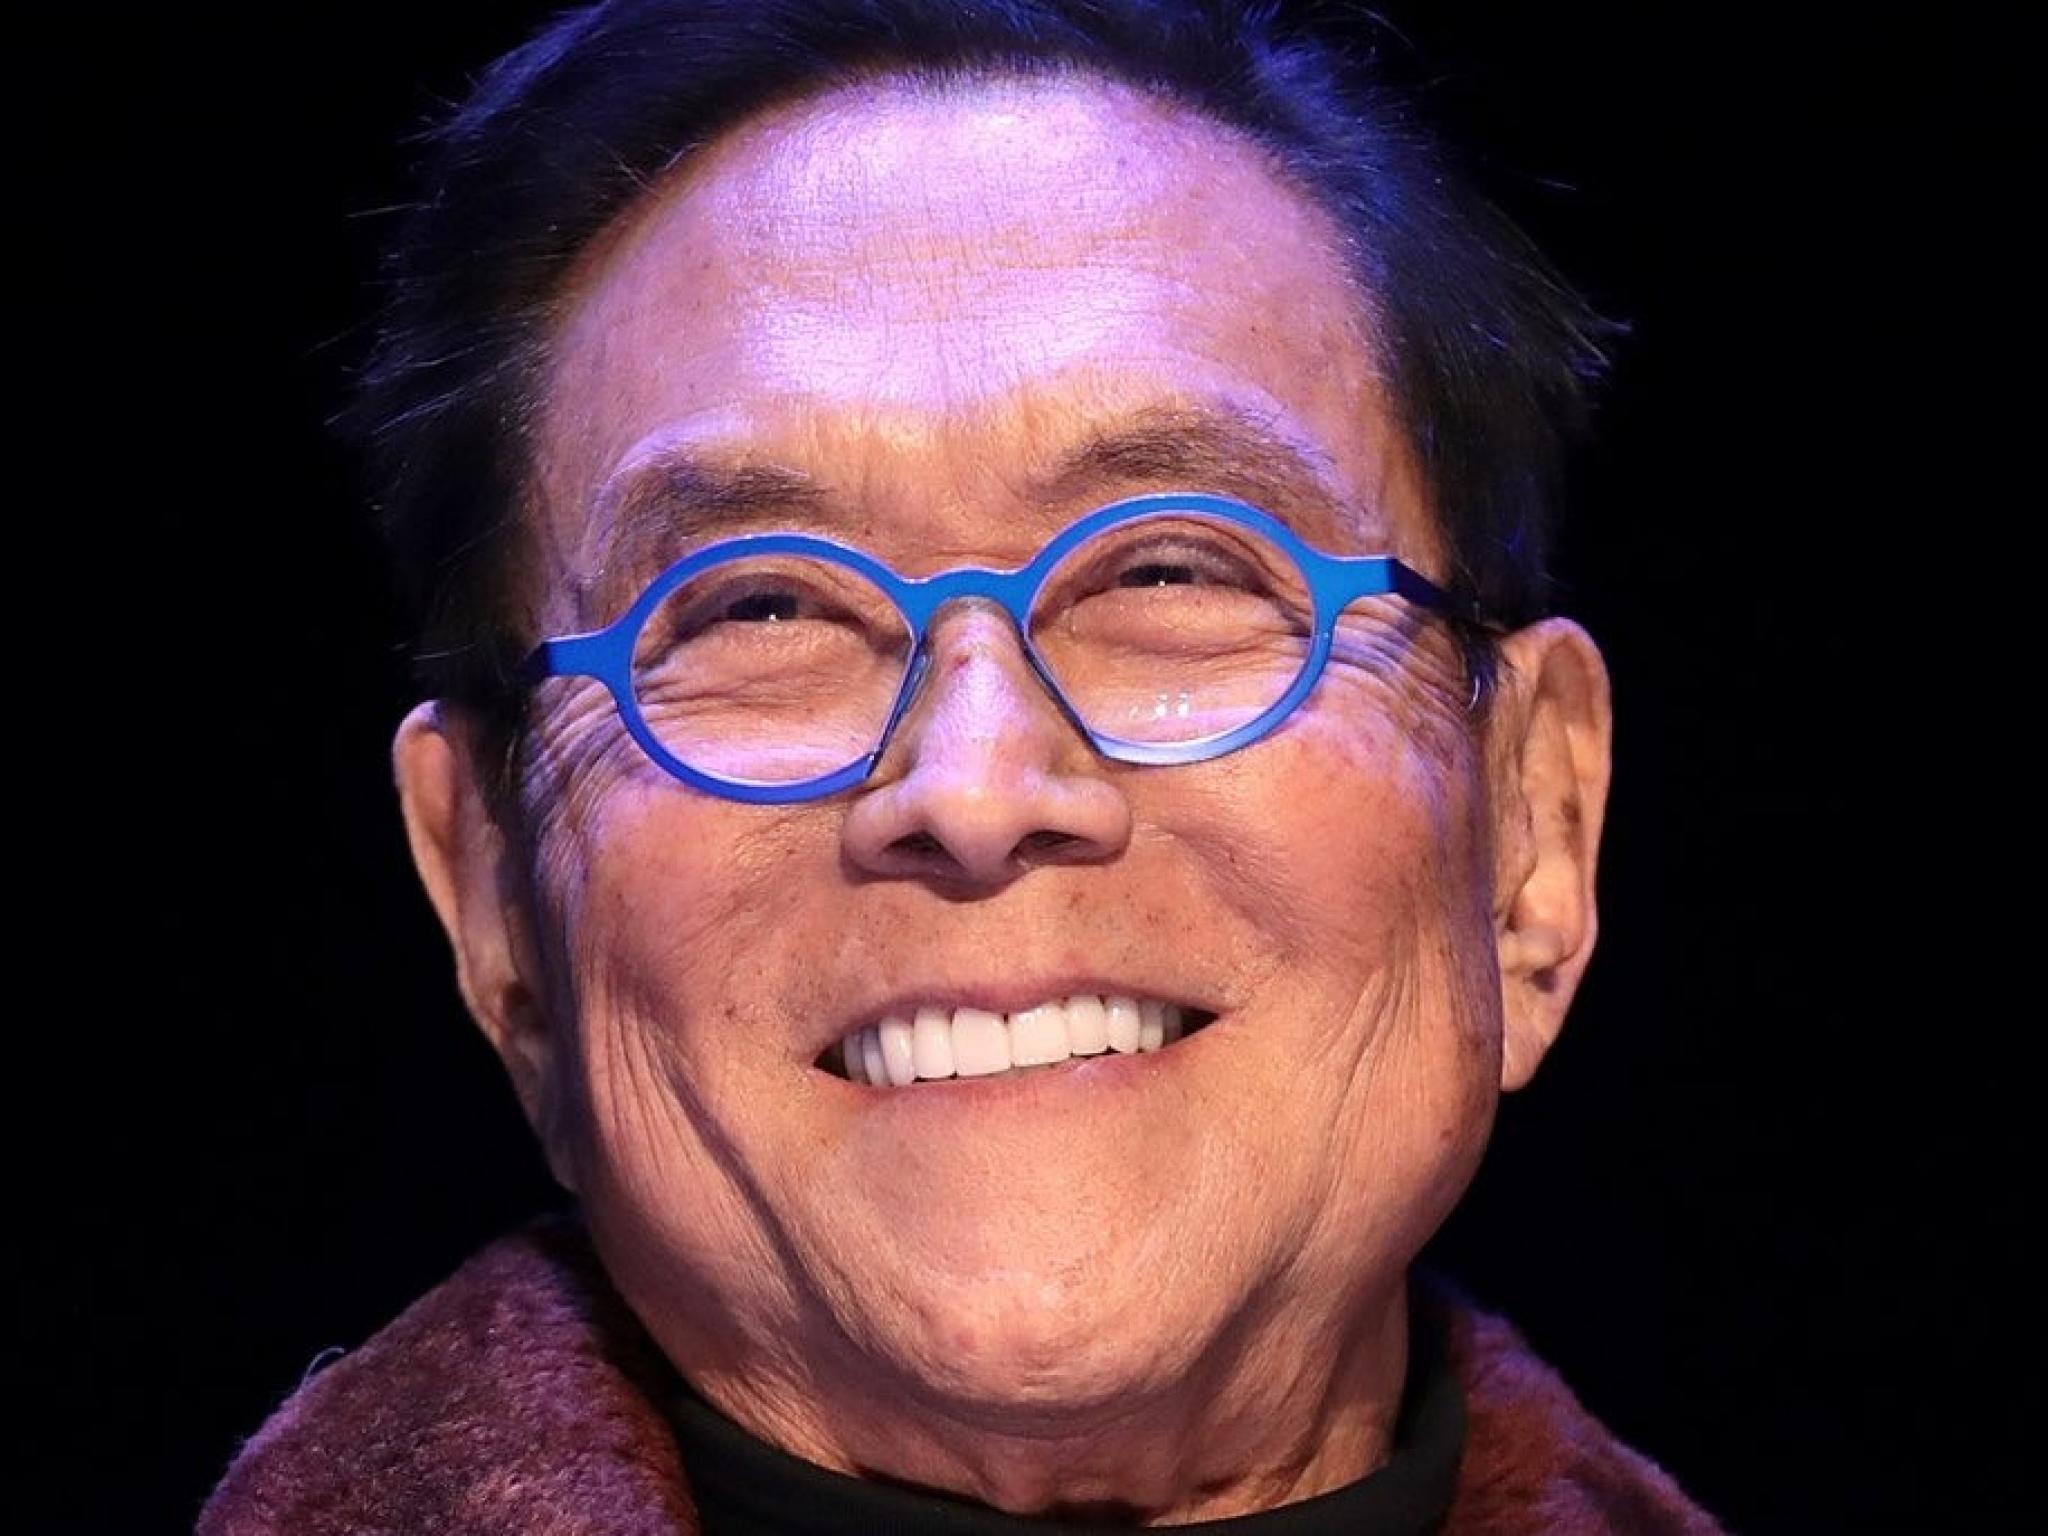  rich-dad-poor-dad-author-robert-kiyosaki-agrees-with-raoul-pals-bitcoin-banana-zone-theory-he-knows-what-hes-talking-about 